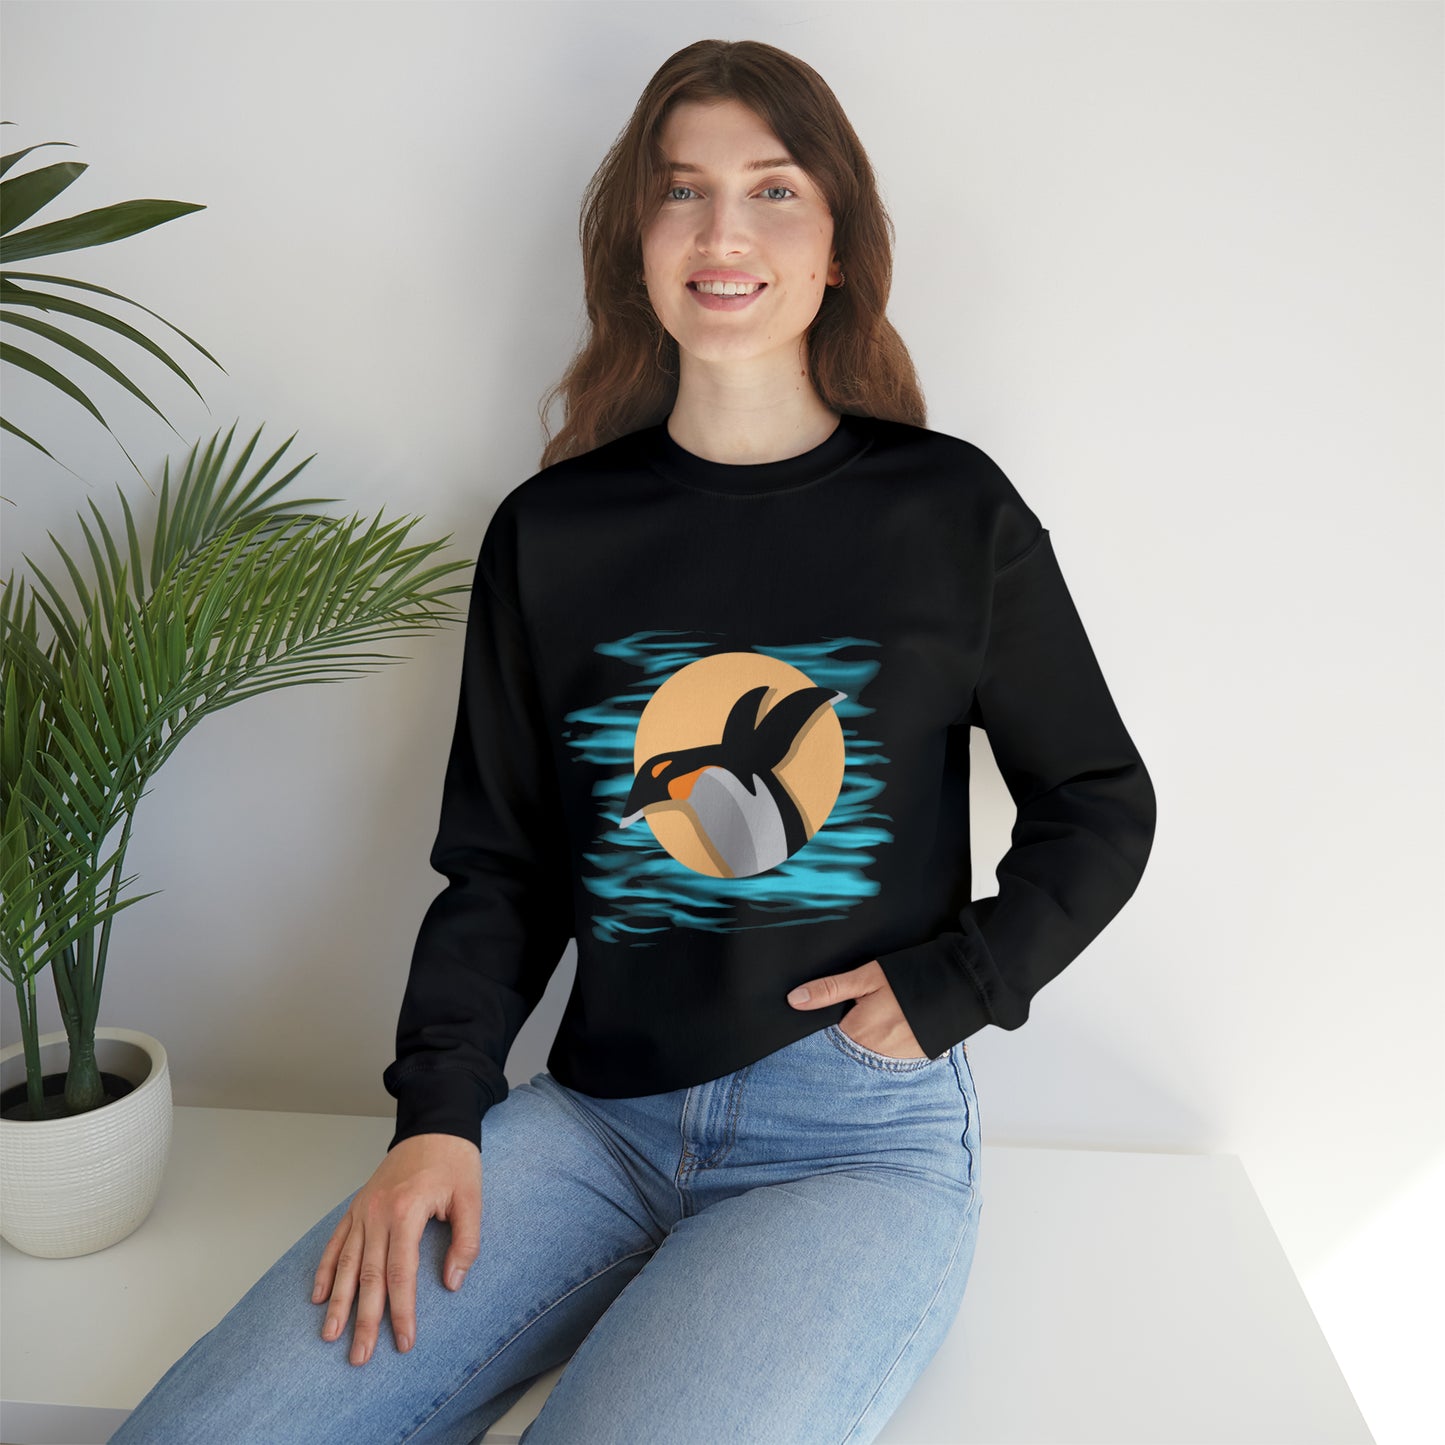 Colorful and playful penguin retro design. Give the gift of this Unisex Heavy Blend™ Crewneck Sweatshirt or get one for yourself.